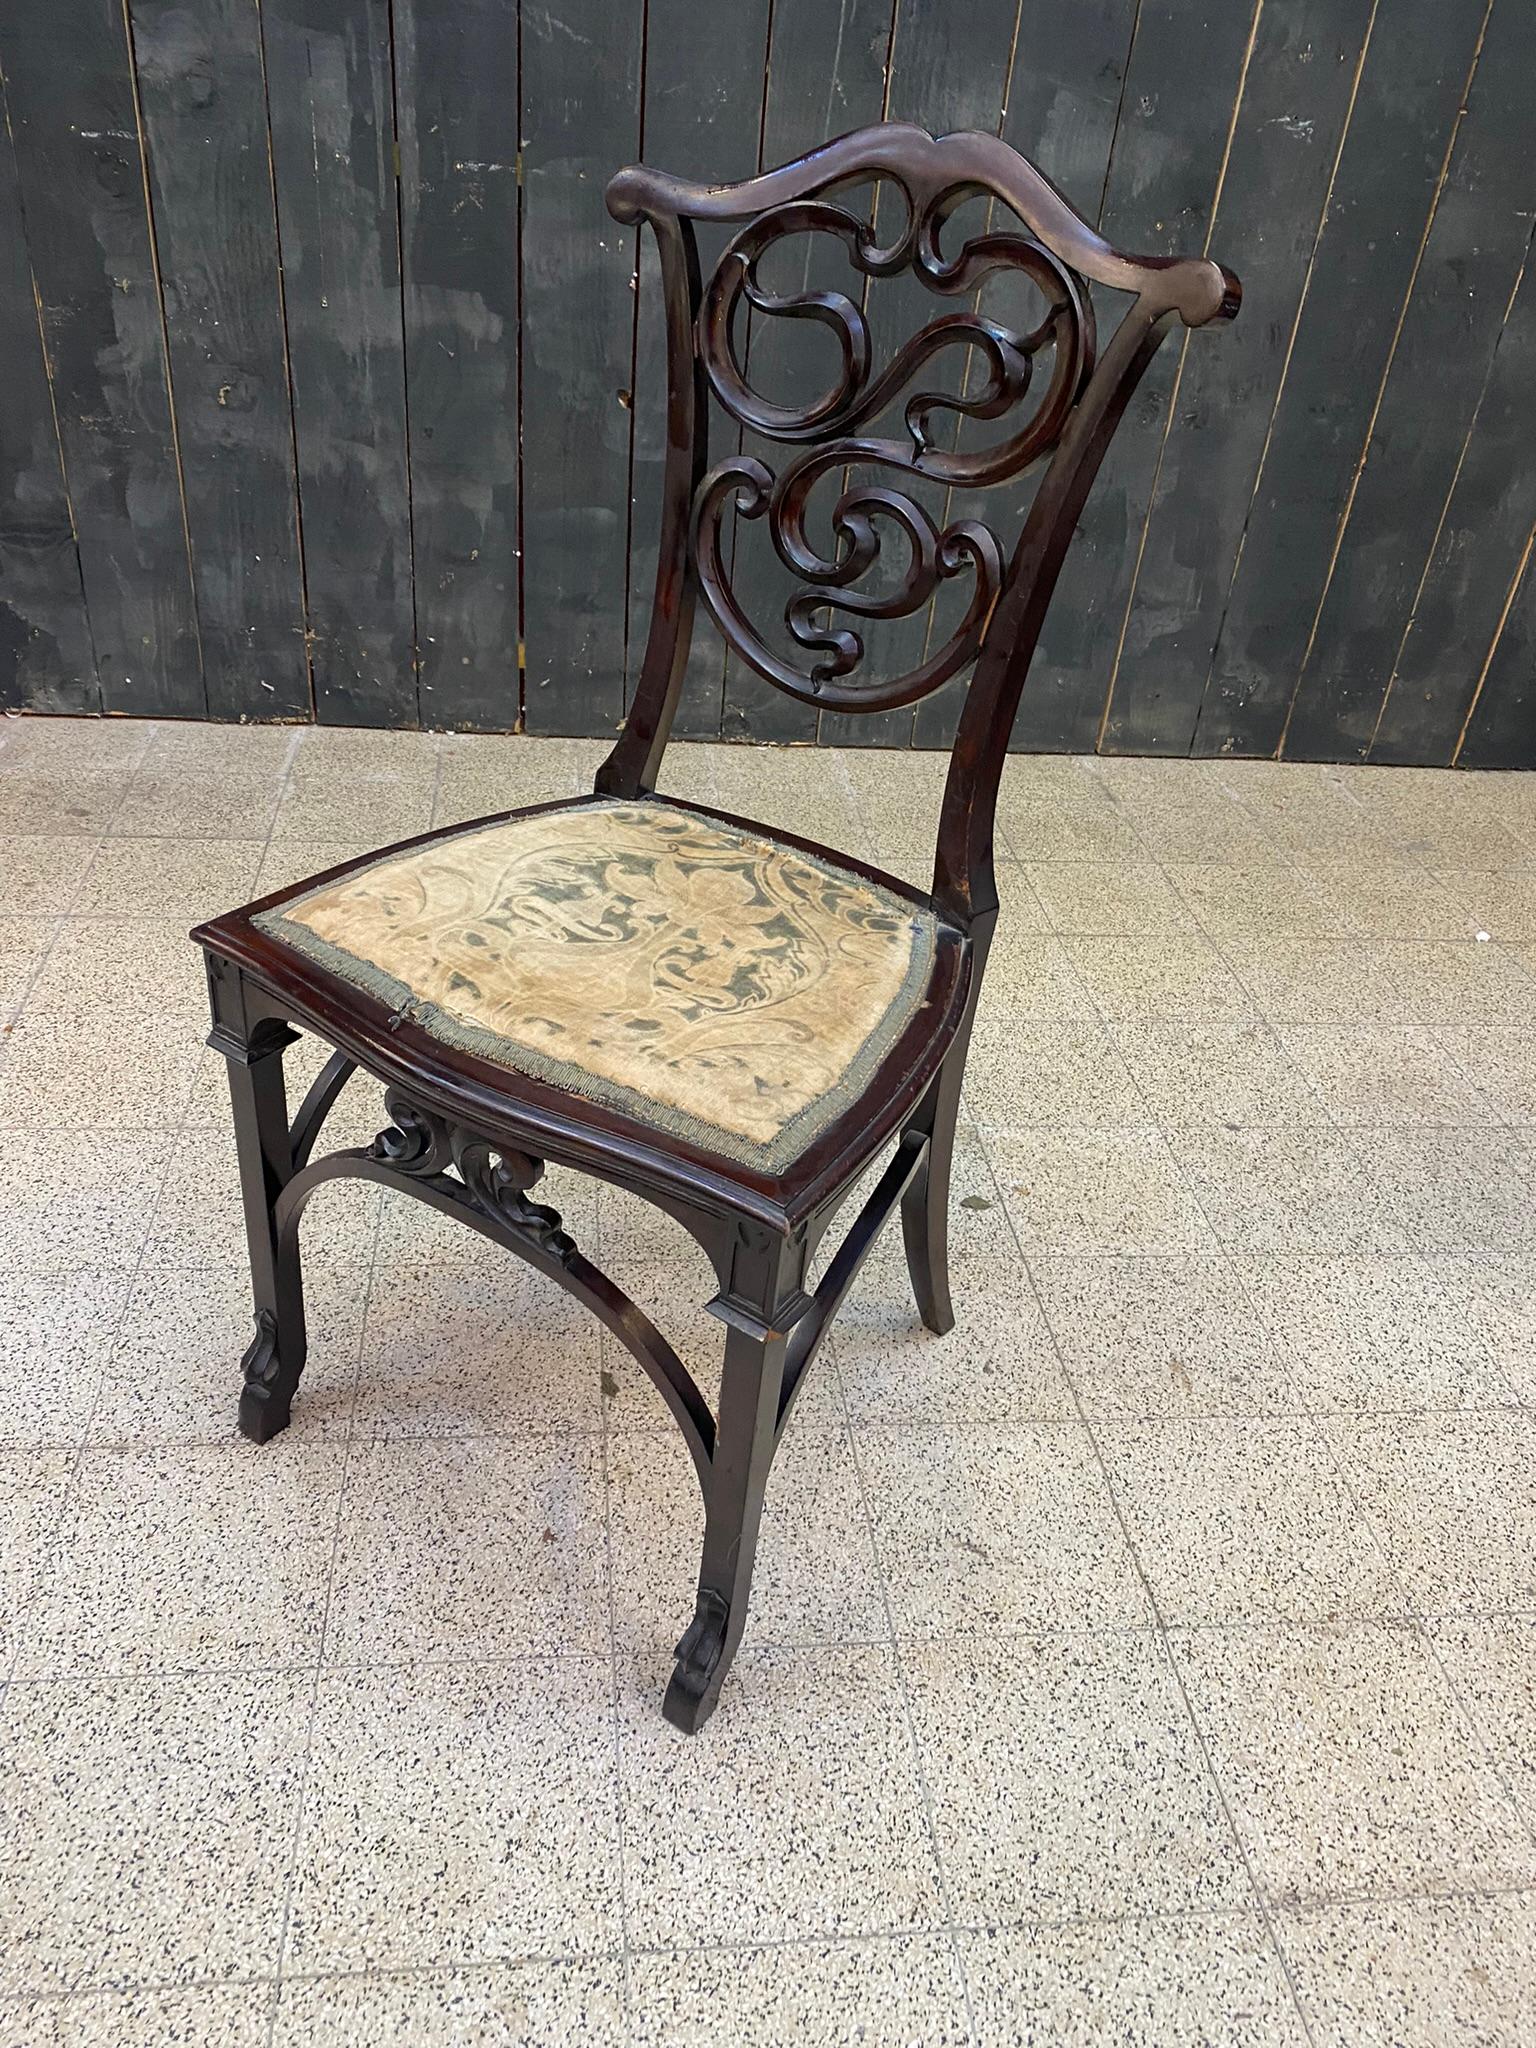 19th Century Art Nouveau period chair with Chinese pattern circa 1880,  For Sale